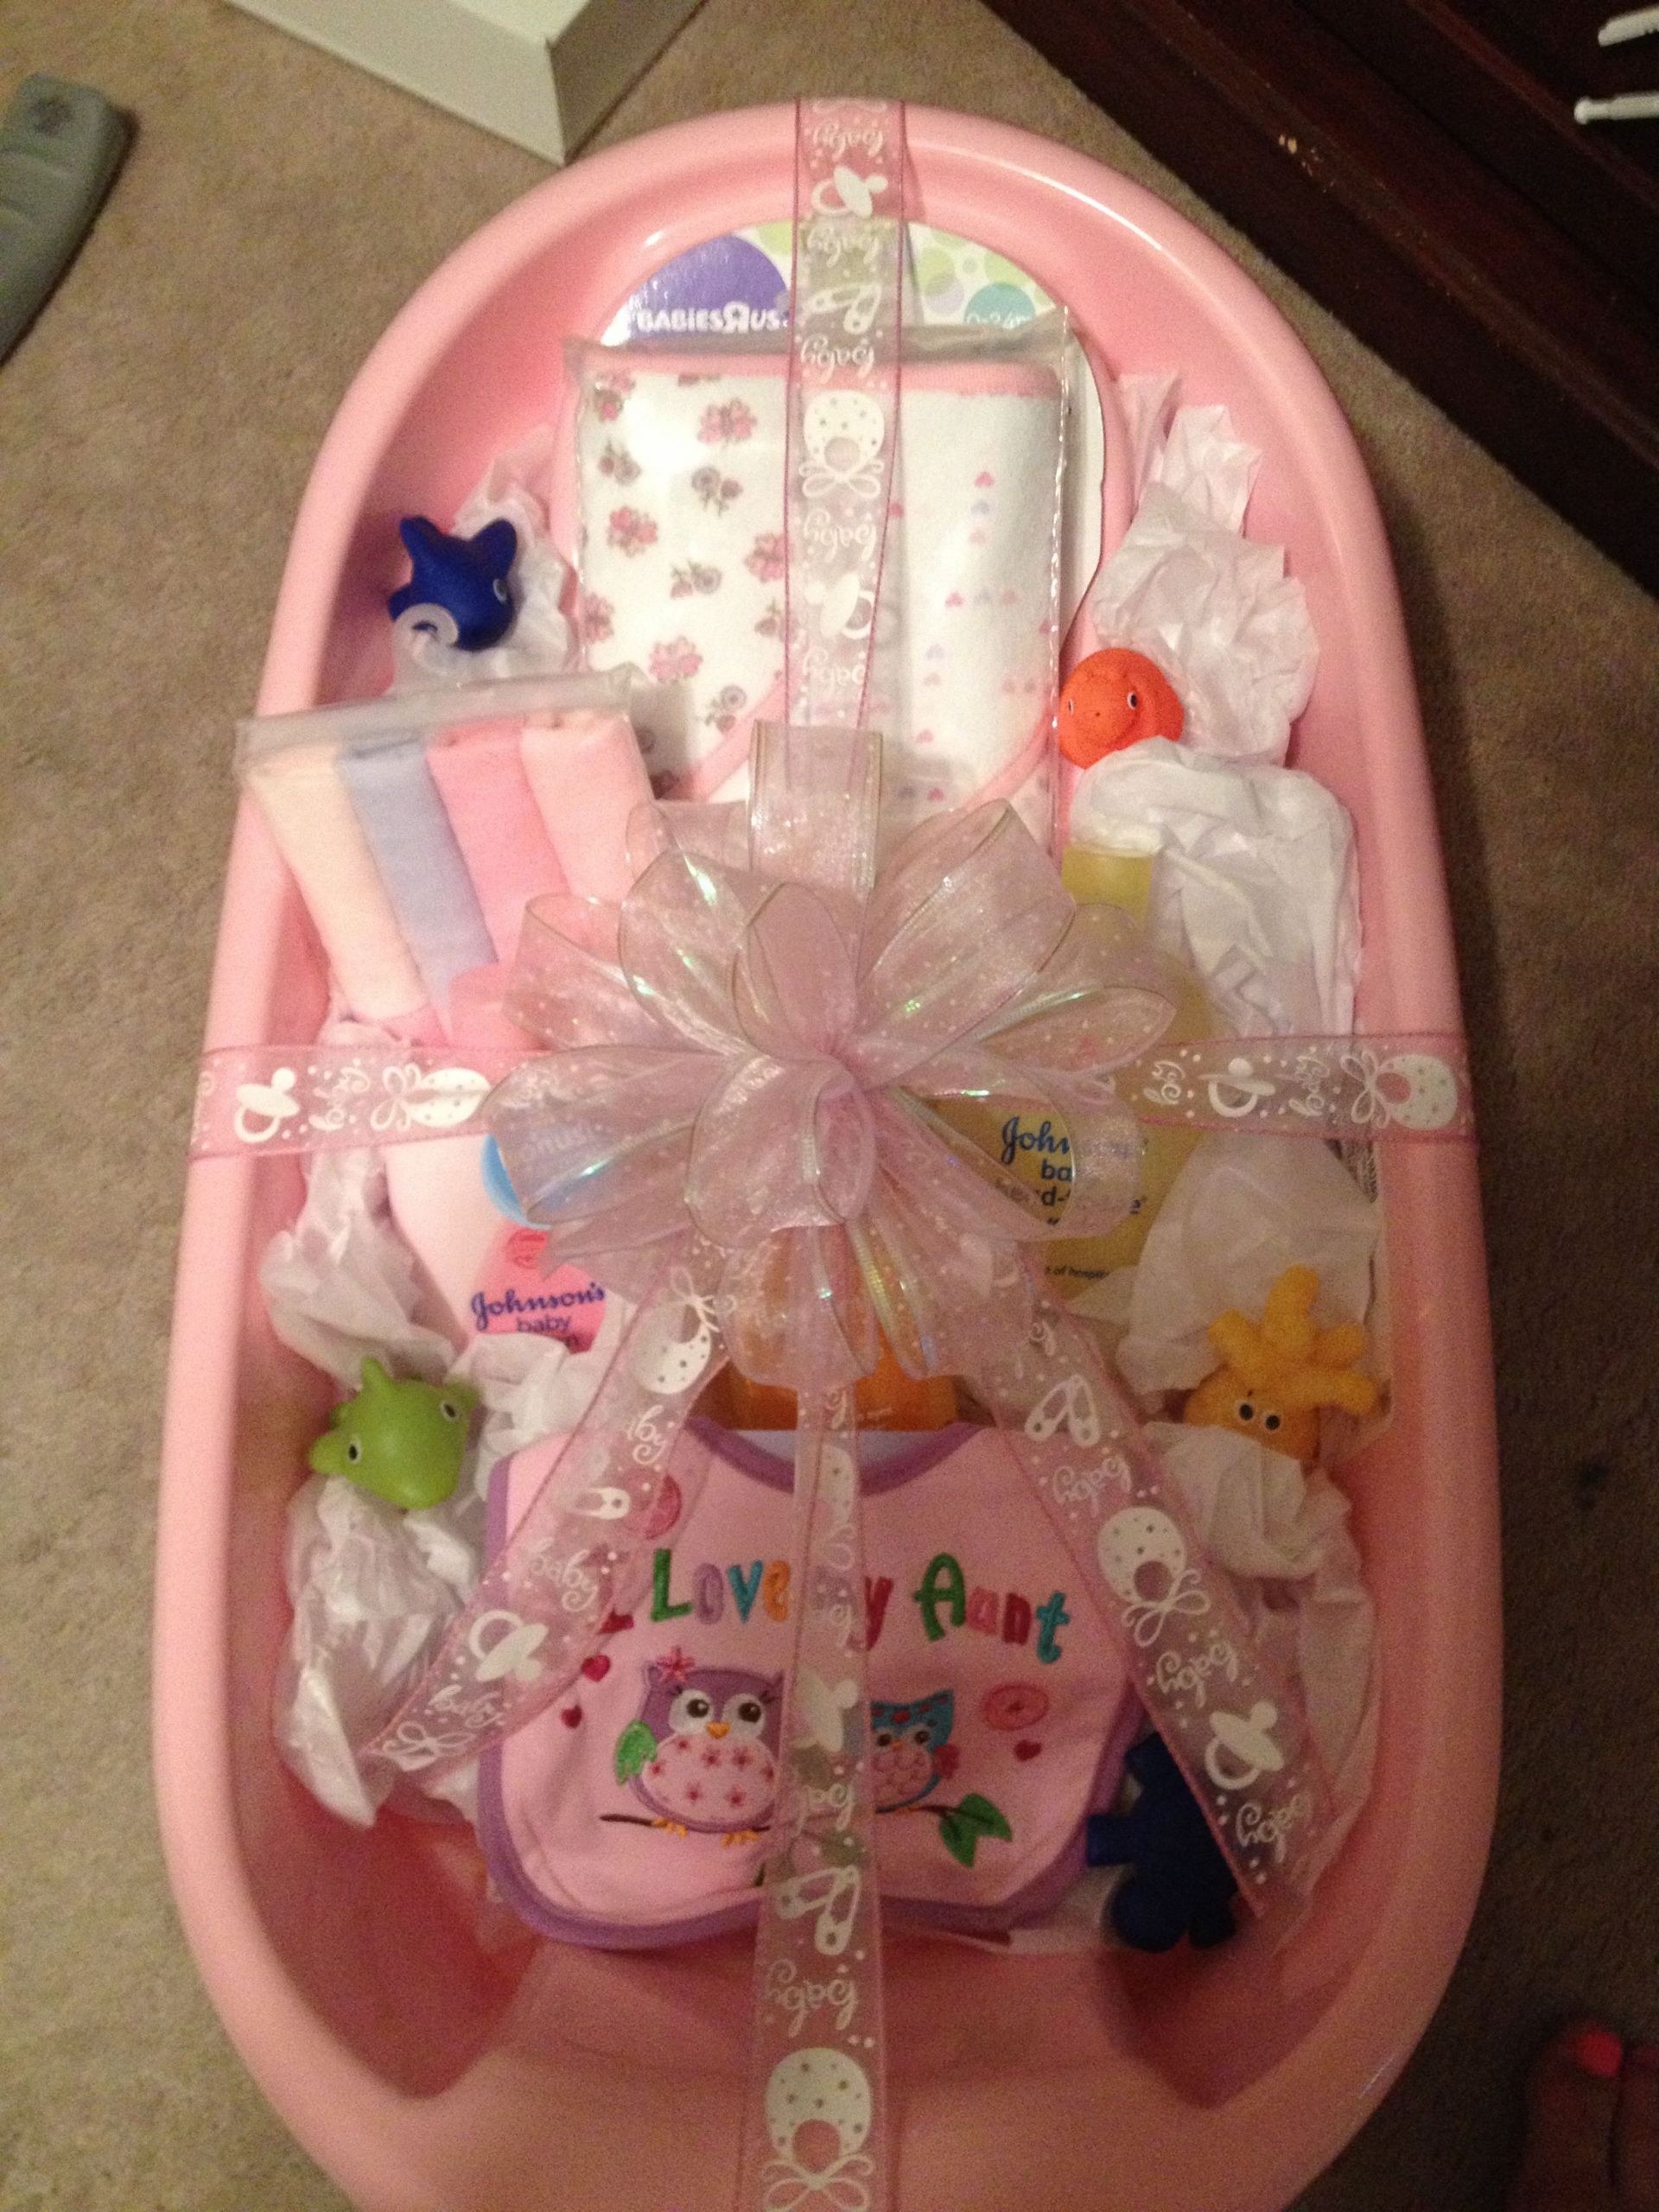 Baby Shower Bathtub Gift Ideas
 Baby bath tub t idea Made this for my sister for her